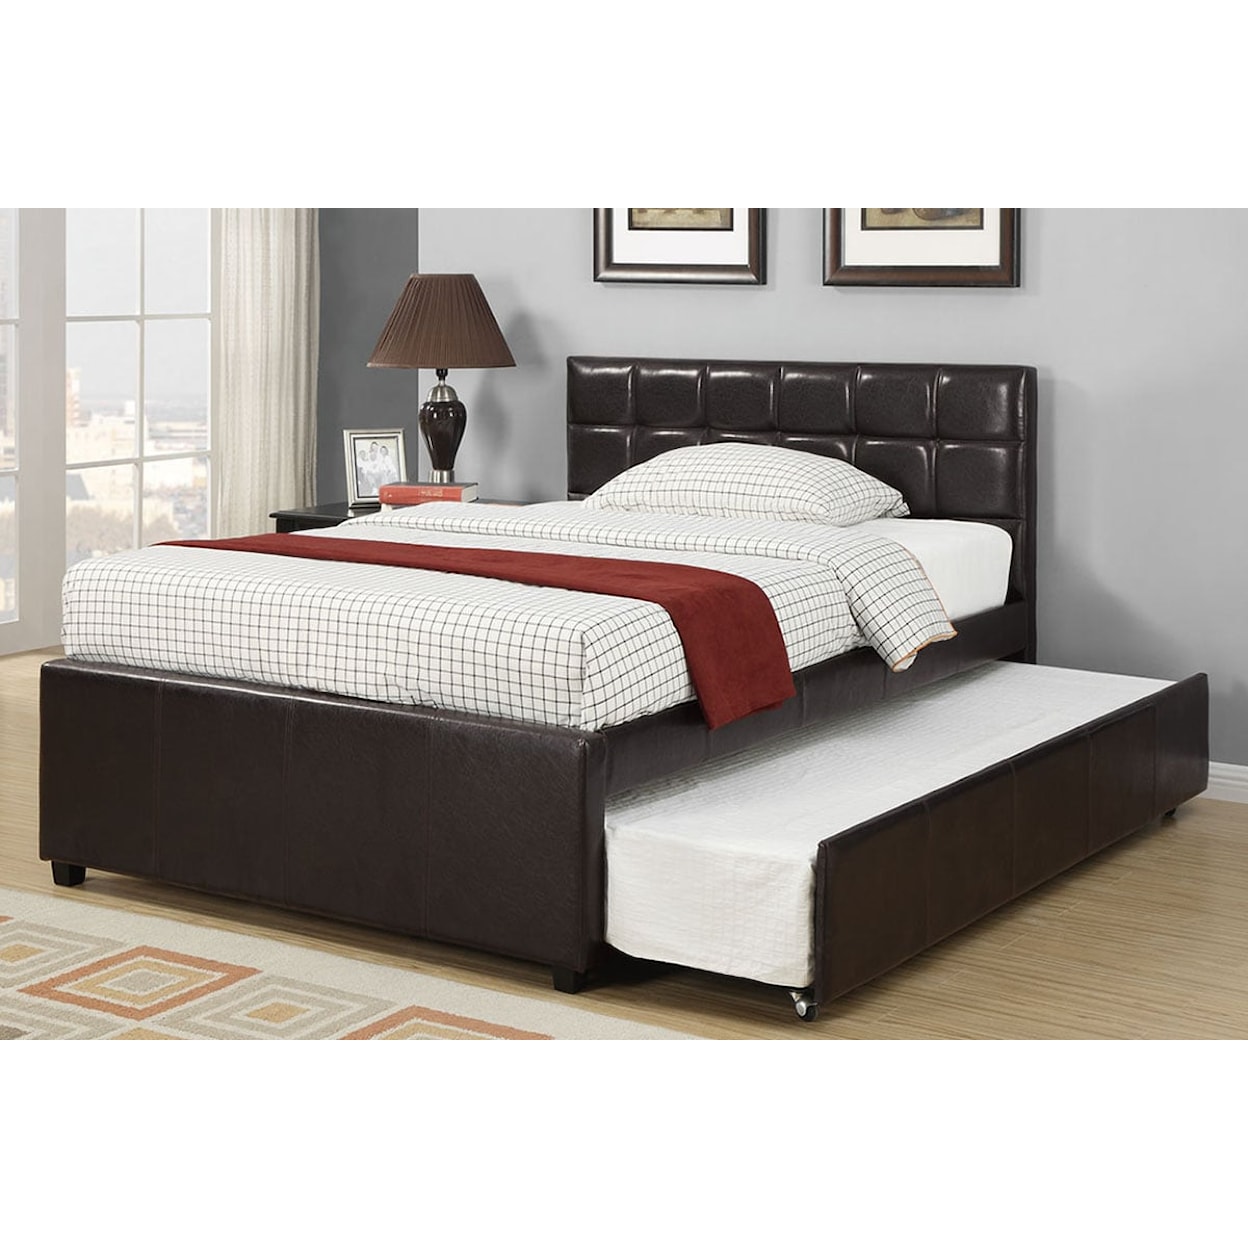 Poundex Trundle Beds SAM BROWN TWIN BED W/ TRUNDLE |